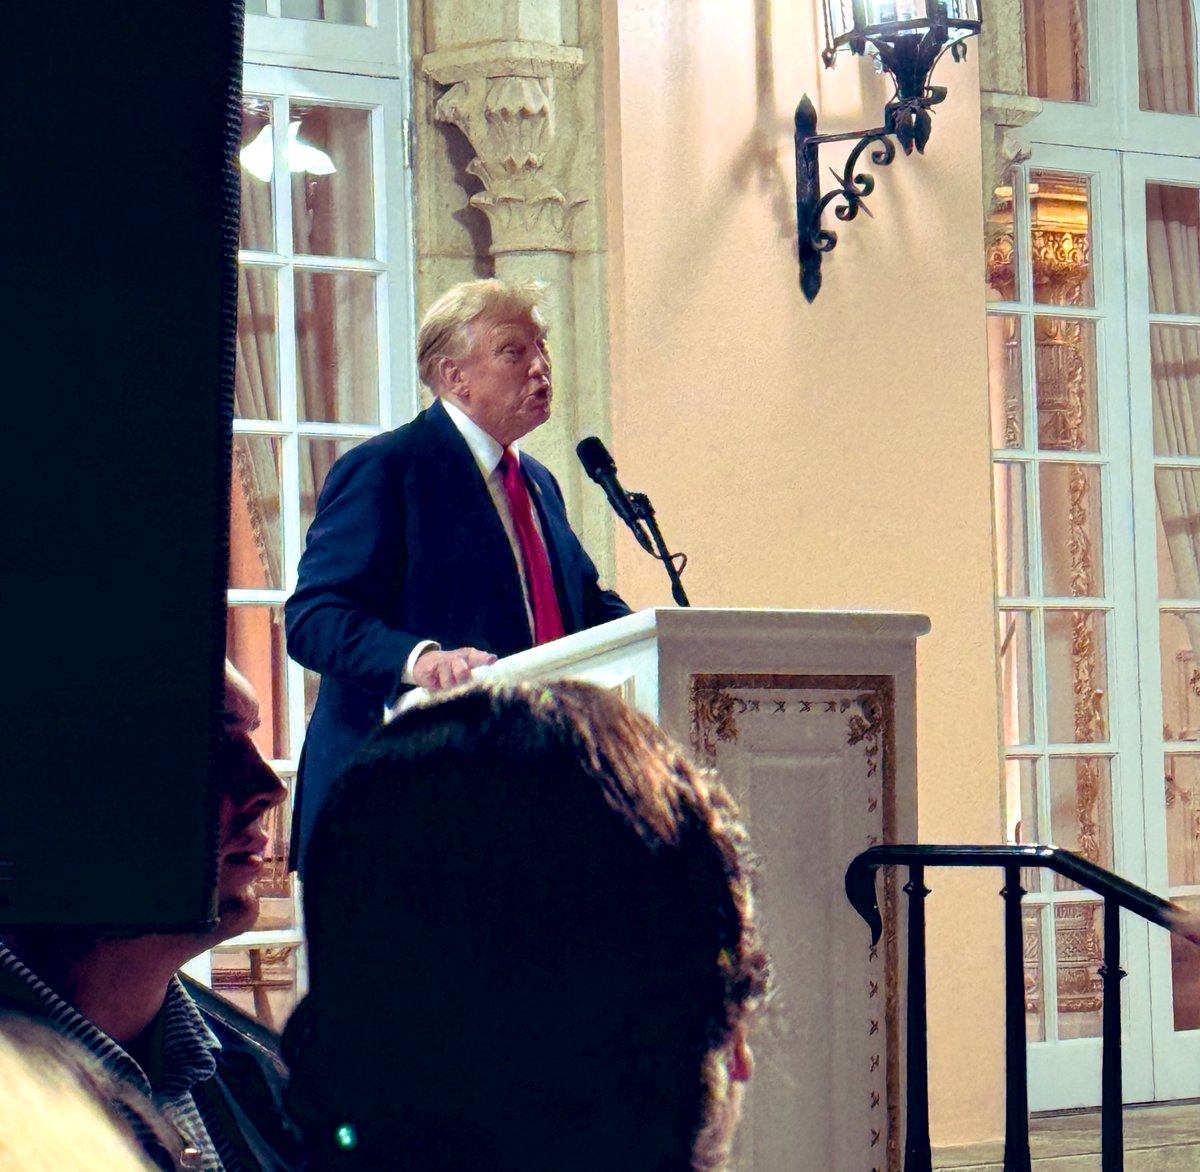 Live here at Mar A Lago. President Trump left here at 630AM for his Atlanta and Orlando events and just got back (10pm) and is giving a speech now. Says he raised at least $15M today.